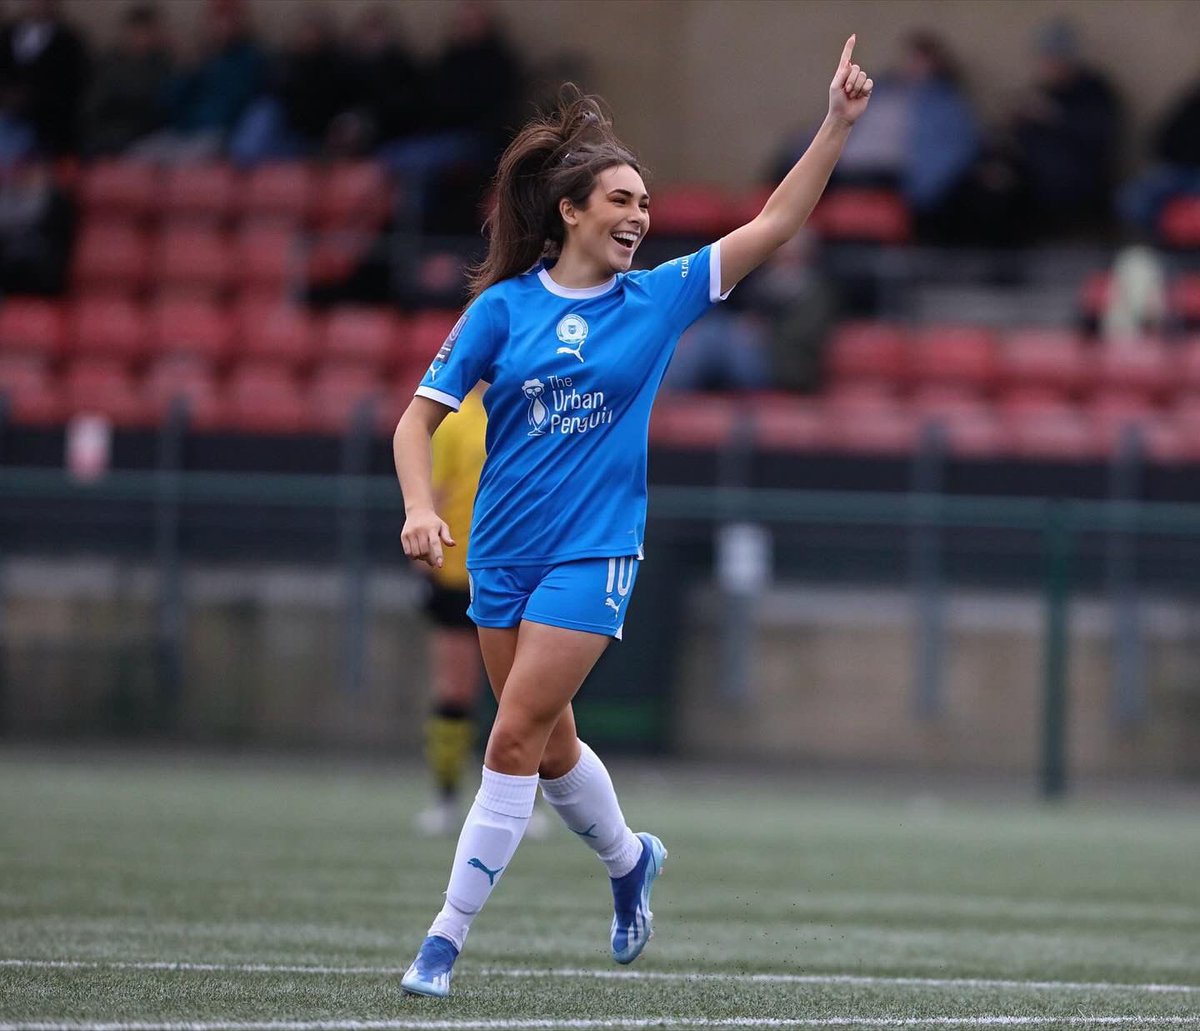 𝗘𝗽𝗶𝘀𝗼𝗱𝗲 𝟭𝟱 - 𝗧𝗮𝗿𝗮 𝗠𝗮𝗲 𝗞𝗶𝗿𝗸 🎙️ Matt chats to @tiaraxmae about her journey in football to date, going viral every time she scores and her aspirations for the future. ⚽️ (📷 - @Darren_wiles) #PUFC #EFL 🍏 podcasts.apple.com/gb/podcast/72c… 🔊 open.spotify.com/episode/0wTHh5…